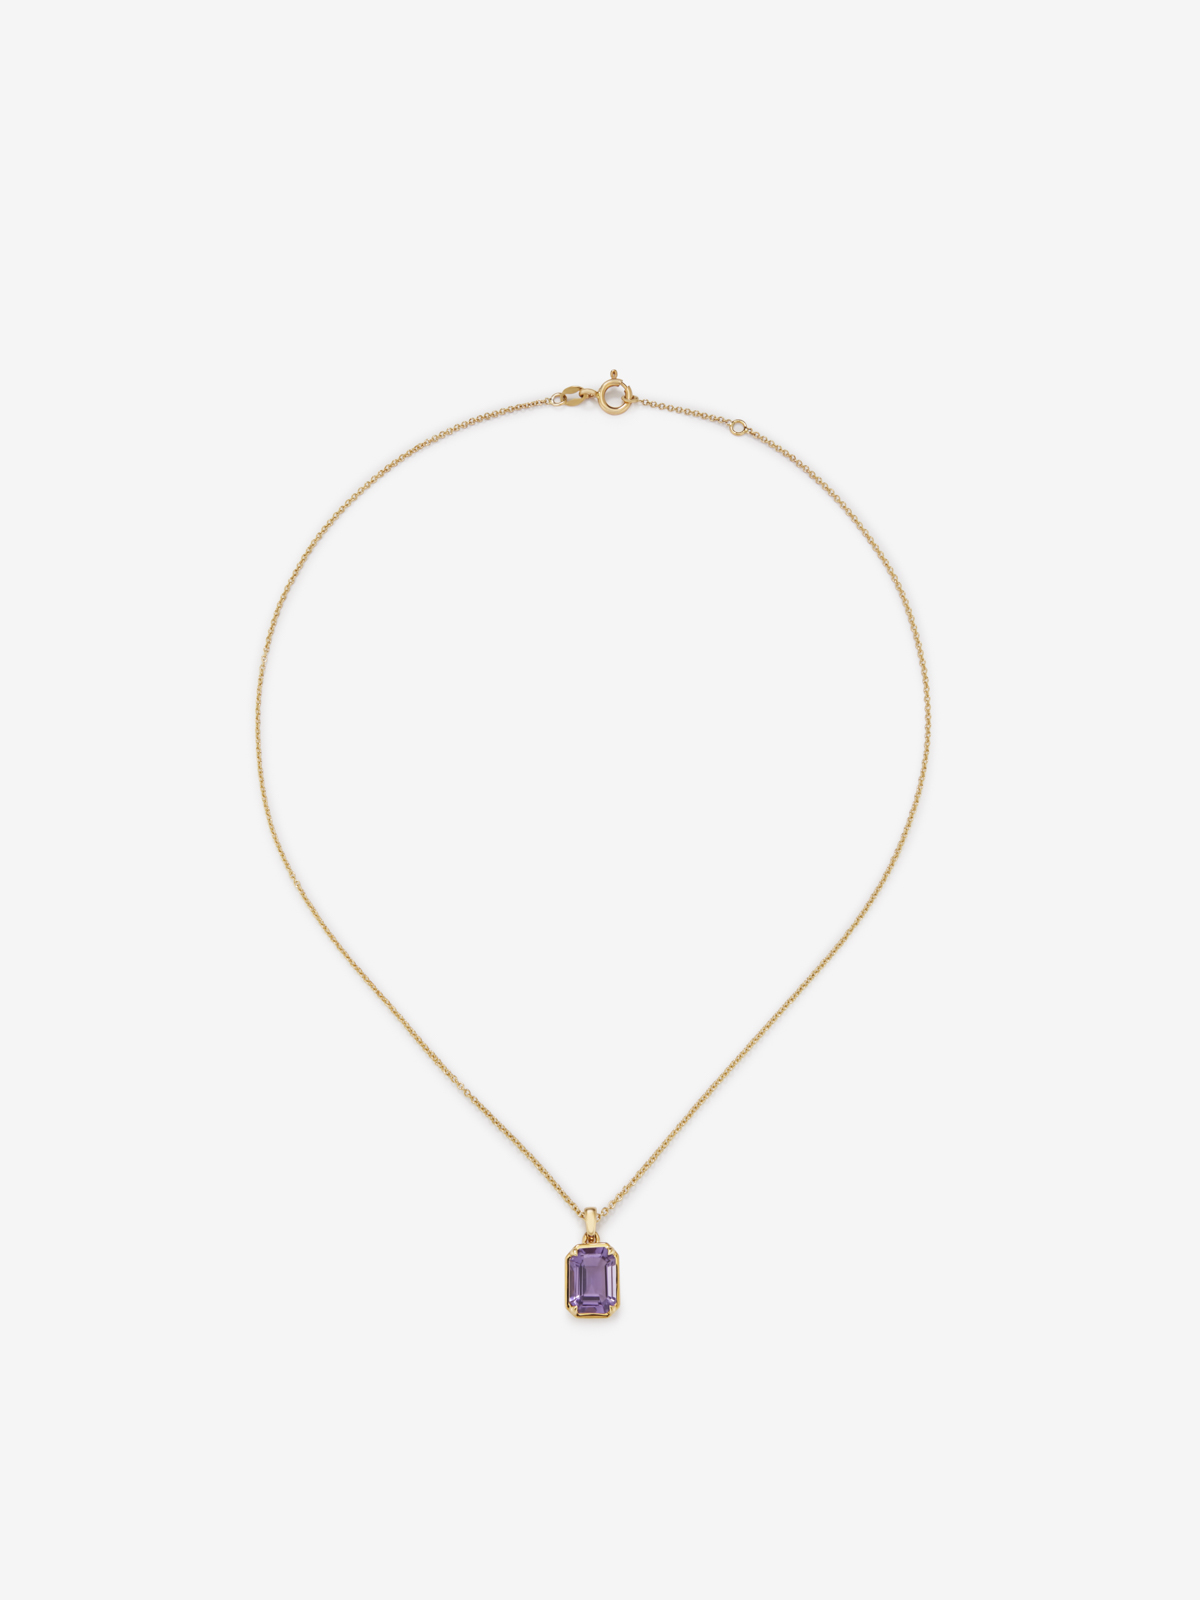 18K Yellow Gold Pendant Chain with Amethyst